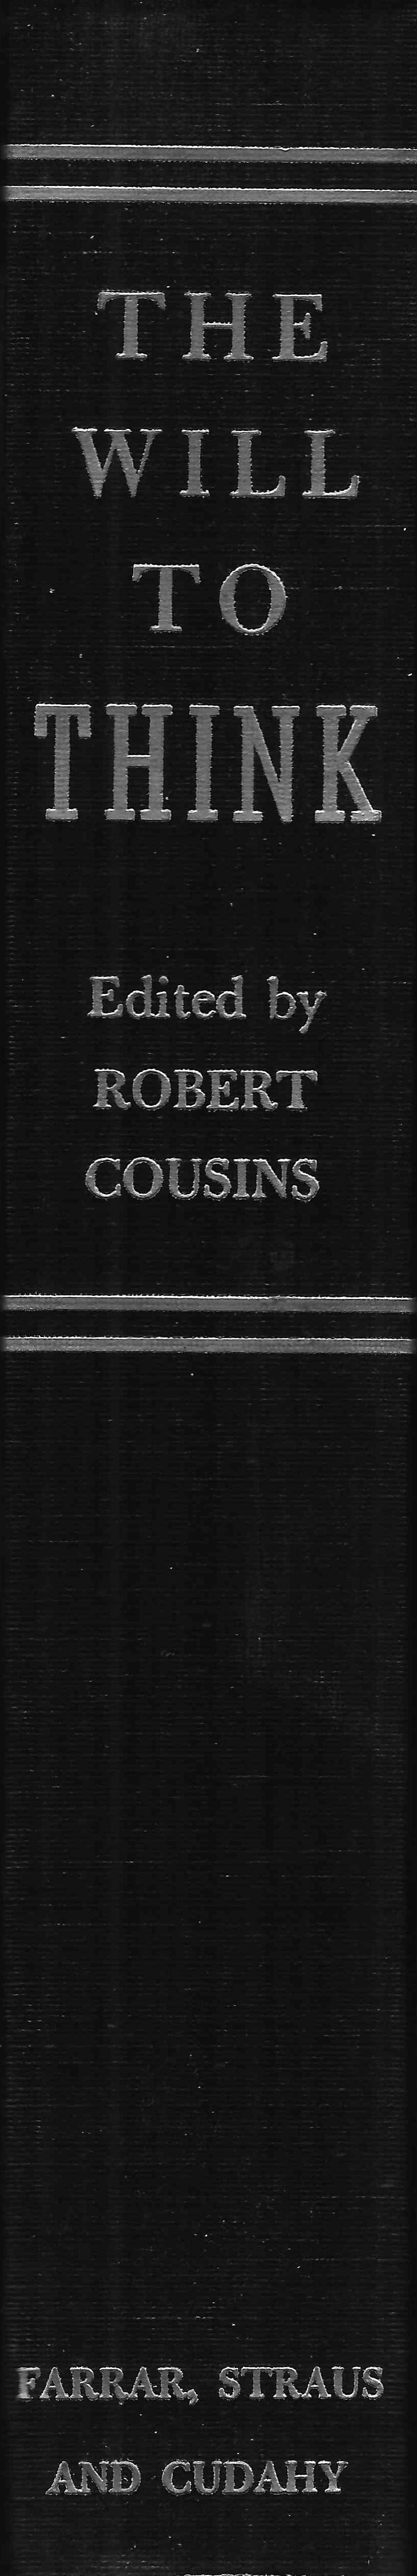 Picture of the spine of Robert Cousins' 